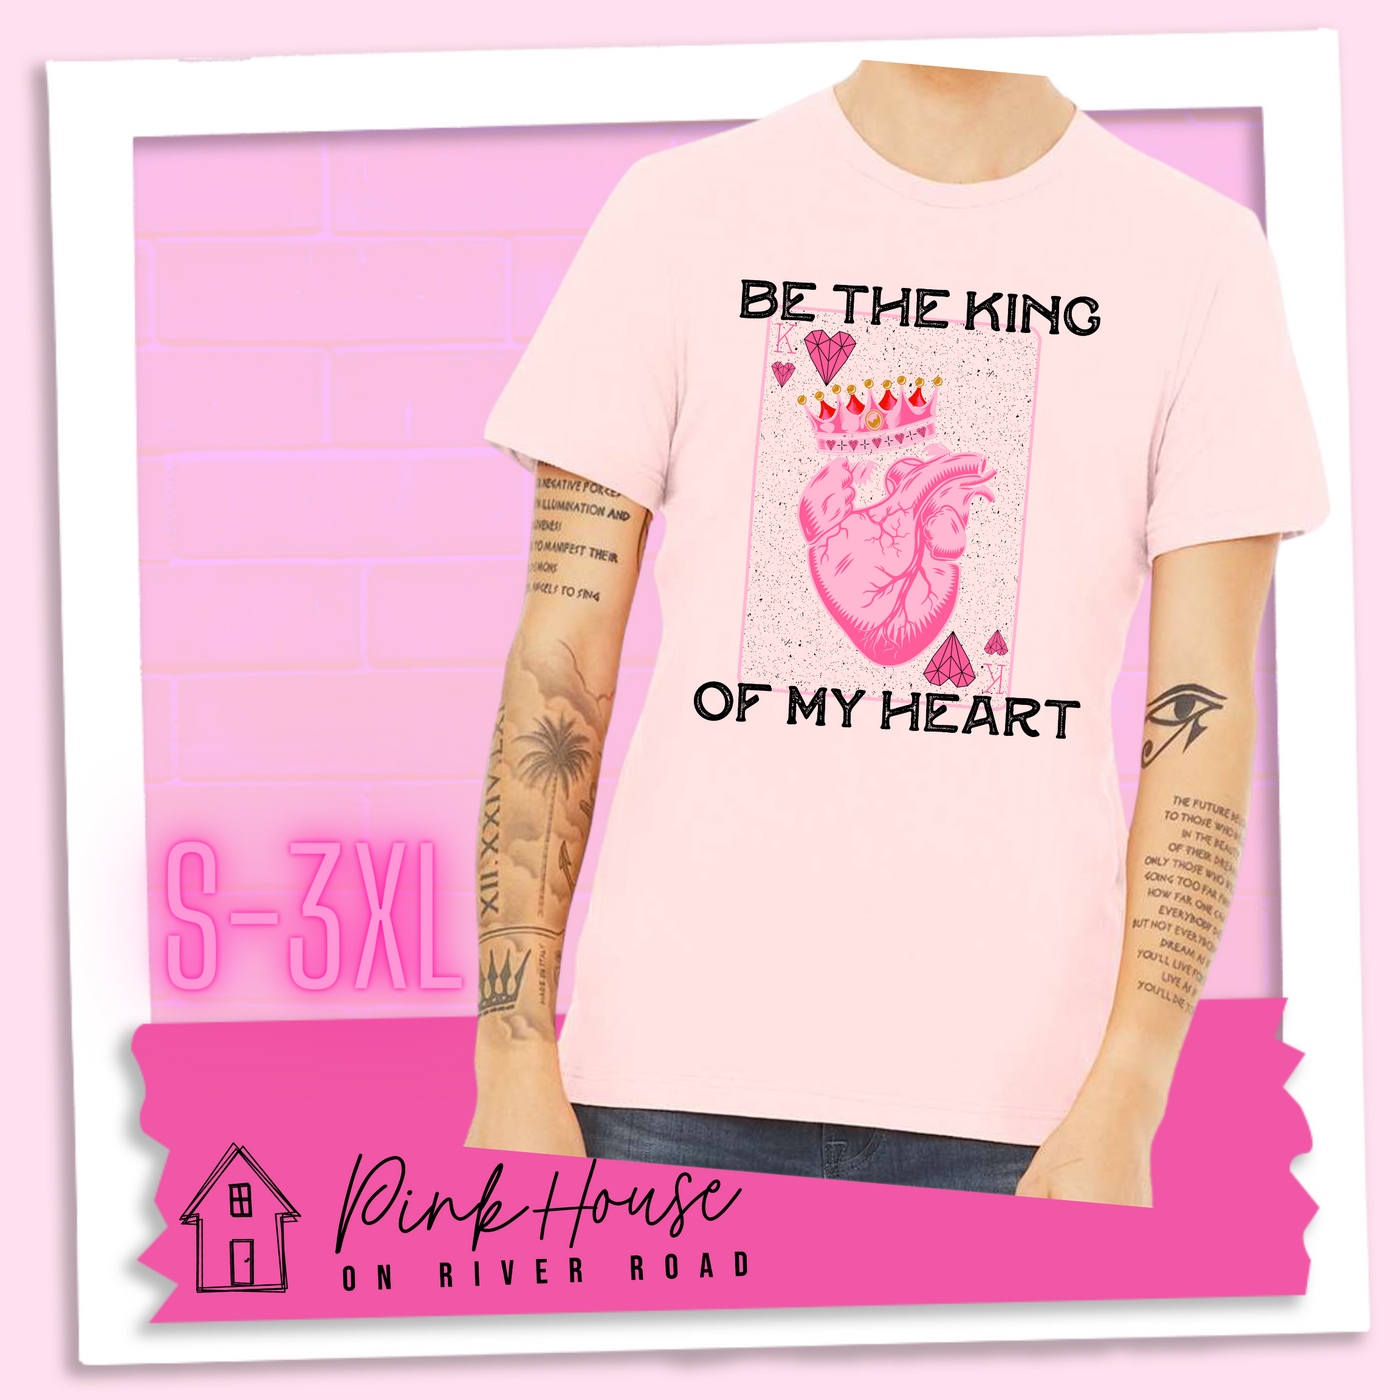 Soft Pink Jersey Tee with a graphic that says "Be The King Of My Heart" in Black writing with a vintage effect. There is a King PLaying card with a speckled background, geometric hearts in the corners with the K and a realistic heart with a crown on it in the middle of the playing card.